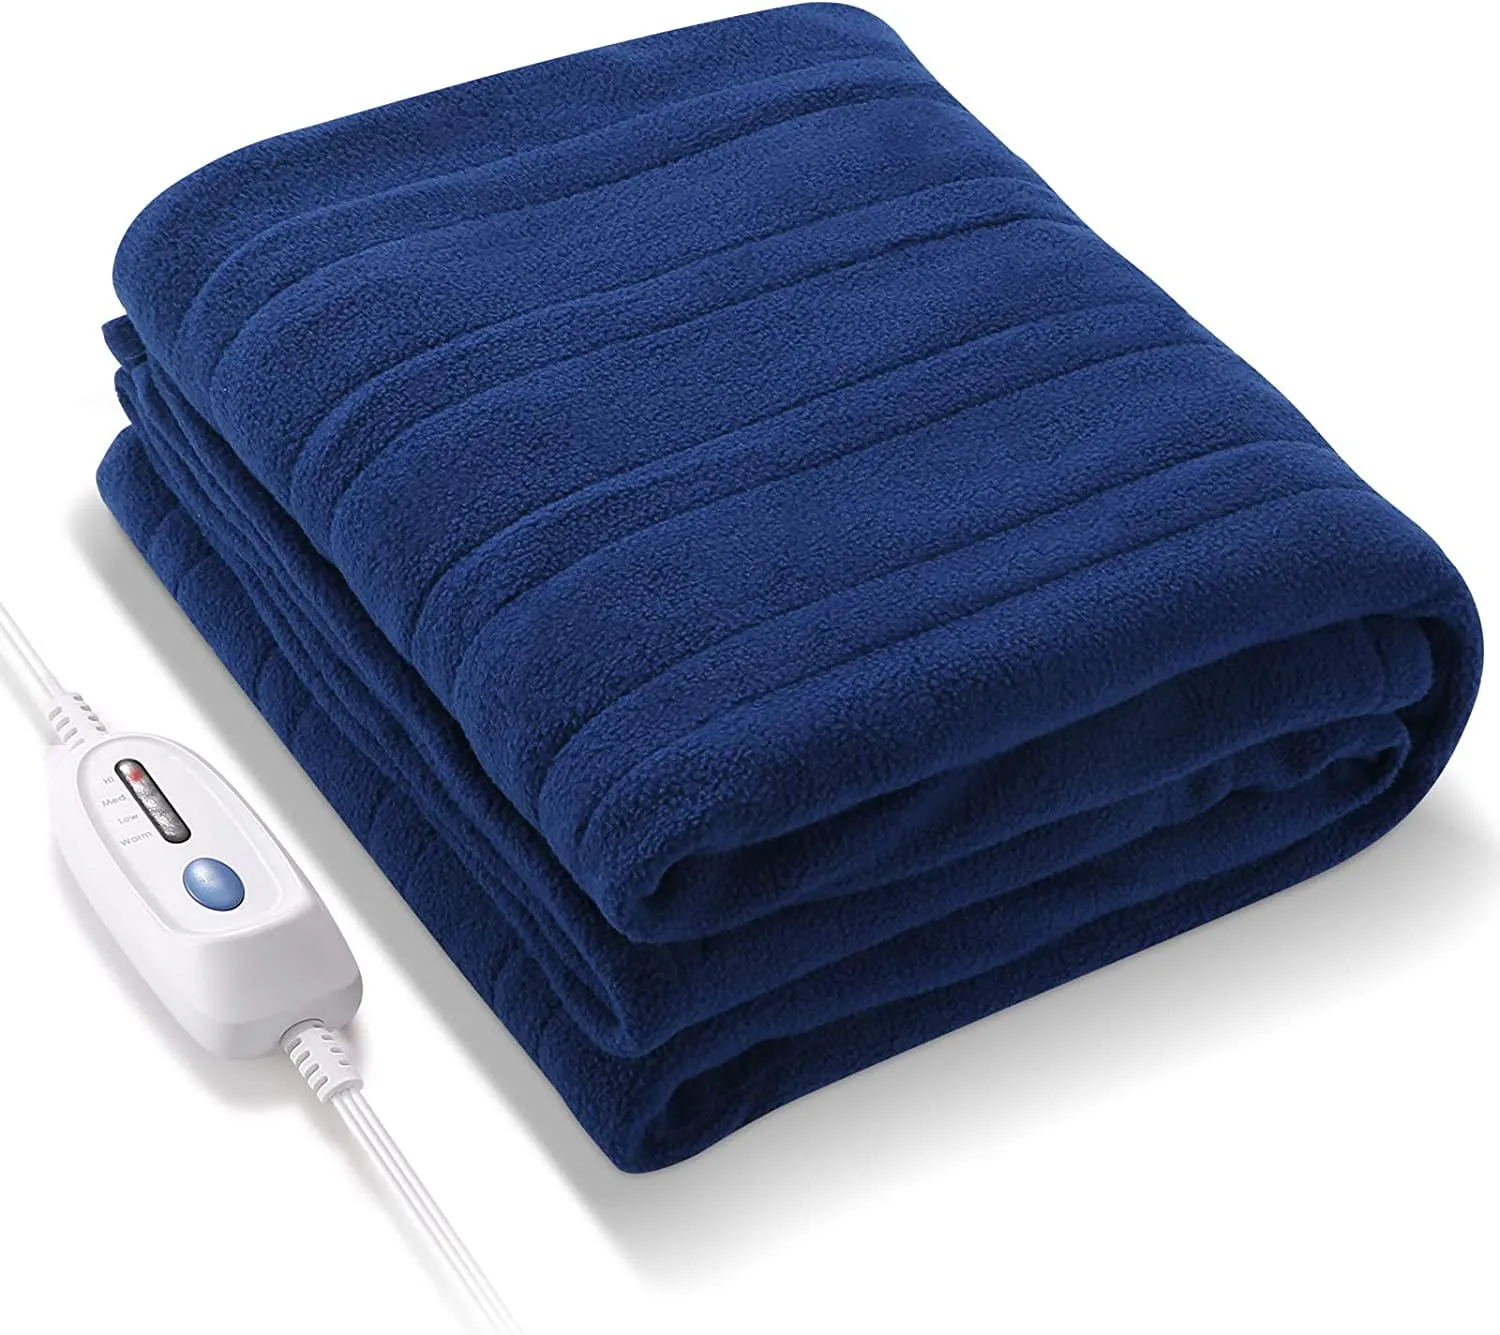 Heated Blanket Throw Blanket For Couch, 50 X 60 Electric Throw Blanket,  Heating Blanket With 5 Heating Levels & 4 Hours Auto Off, Soft Fleece Blanke